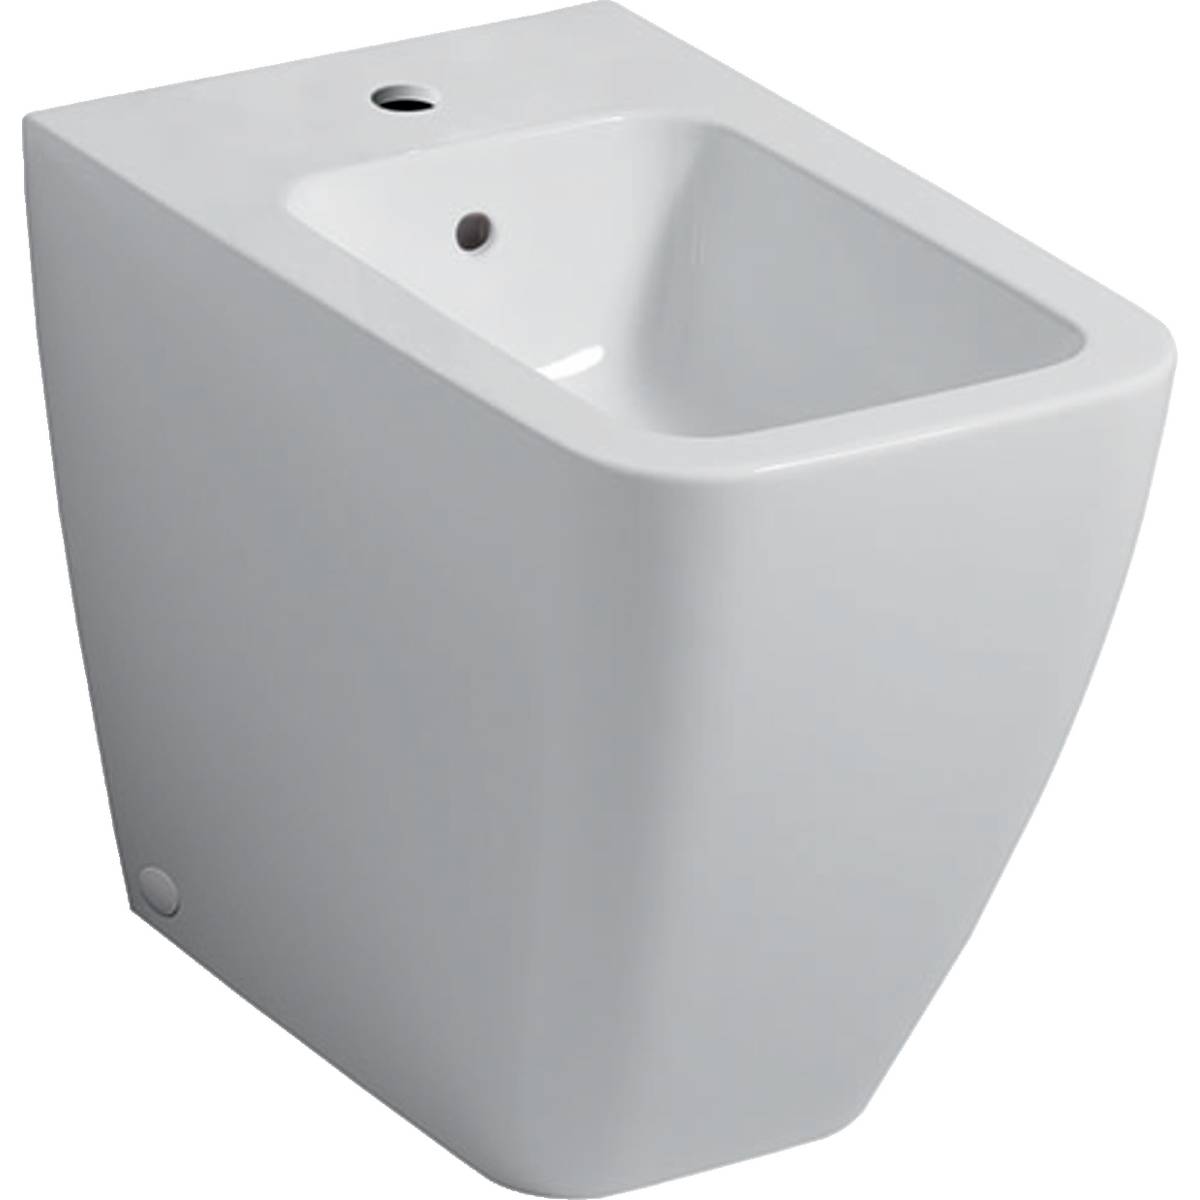 iCon Square floor-standing bidet, back-to-wall, shrouded